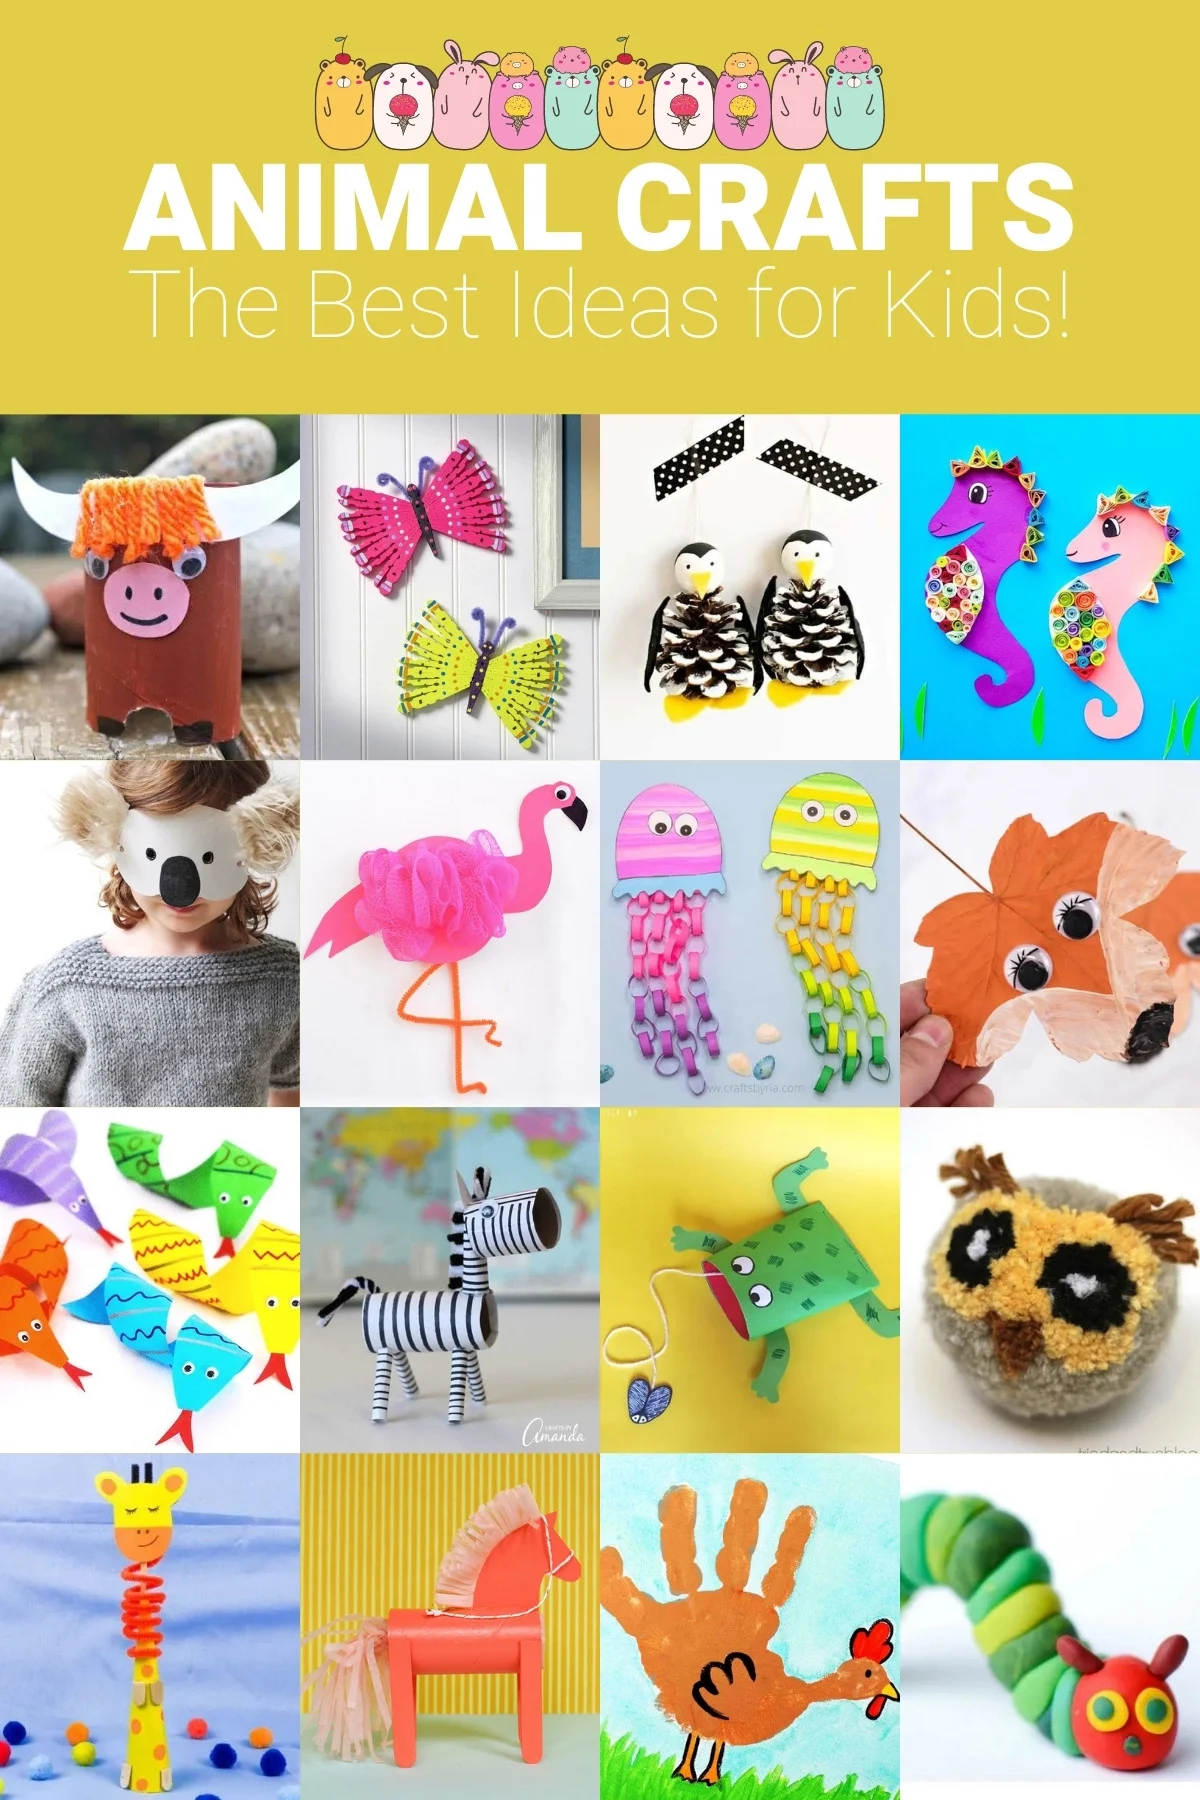 Animal Crafts: The Best Ideas for Kids - DIY Candy